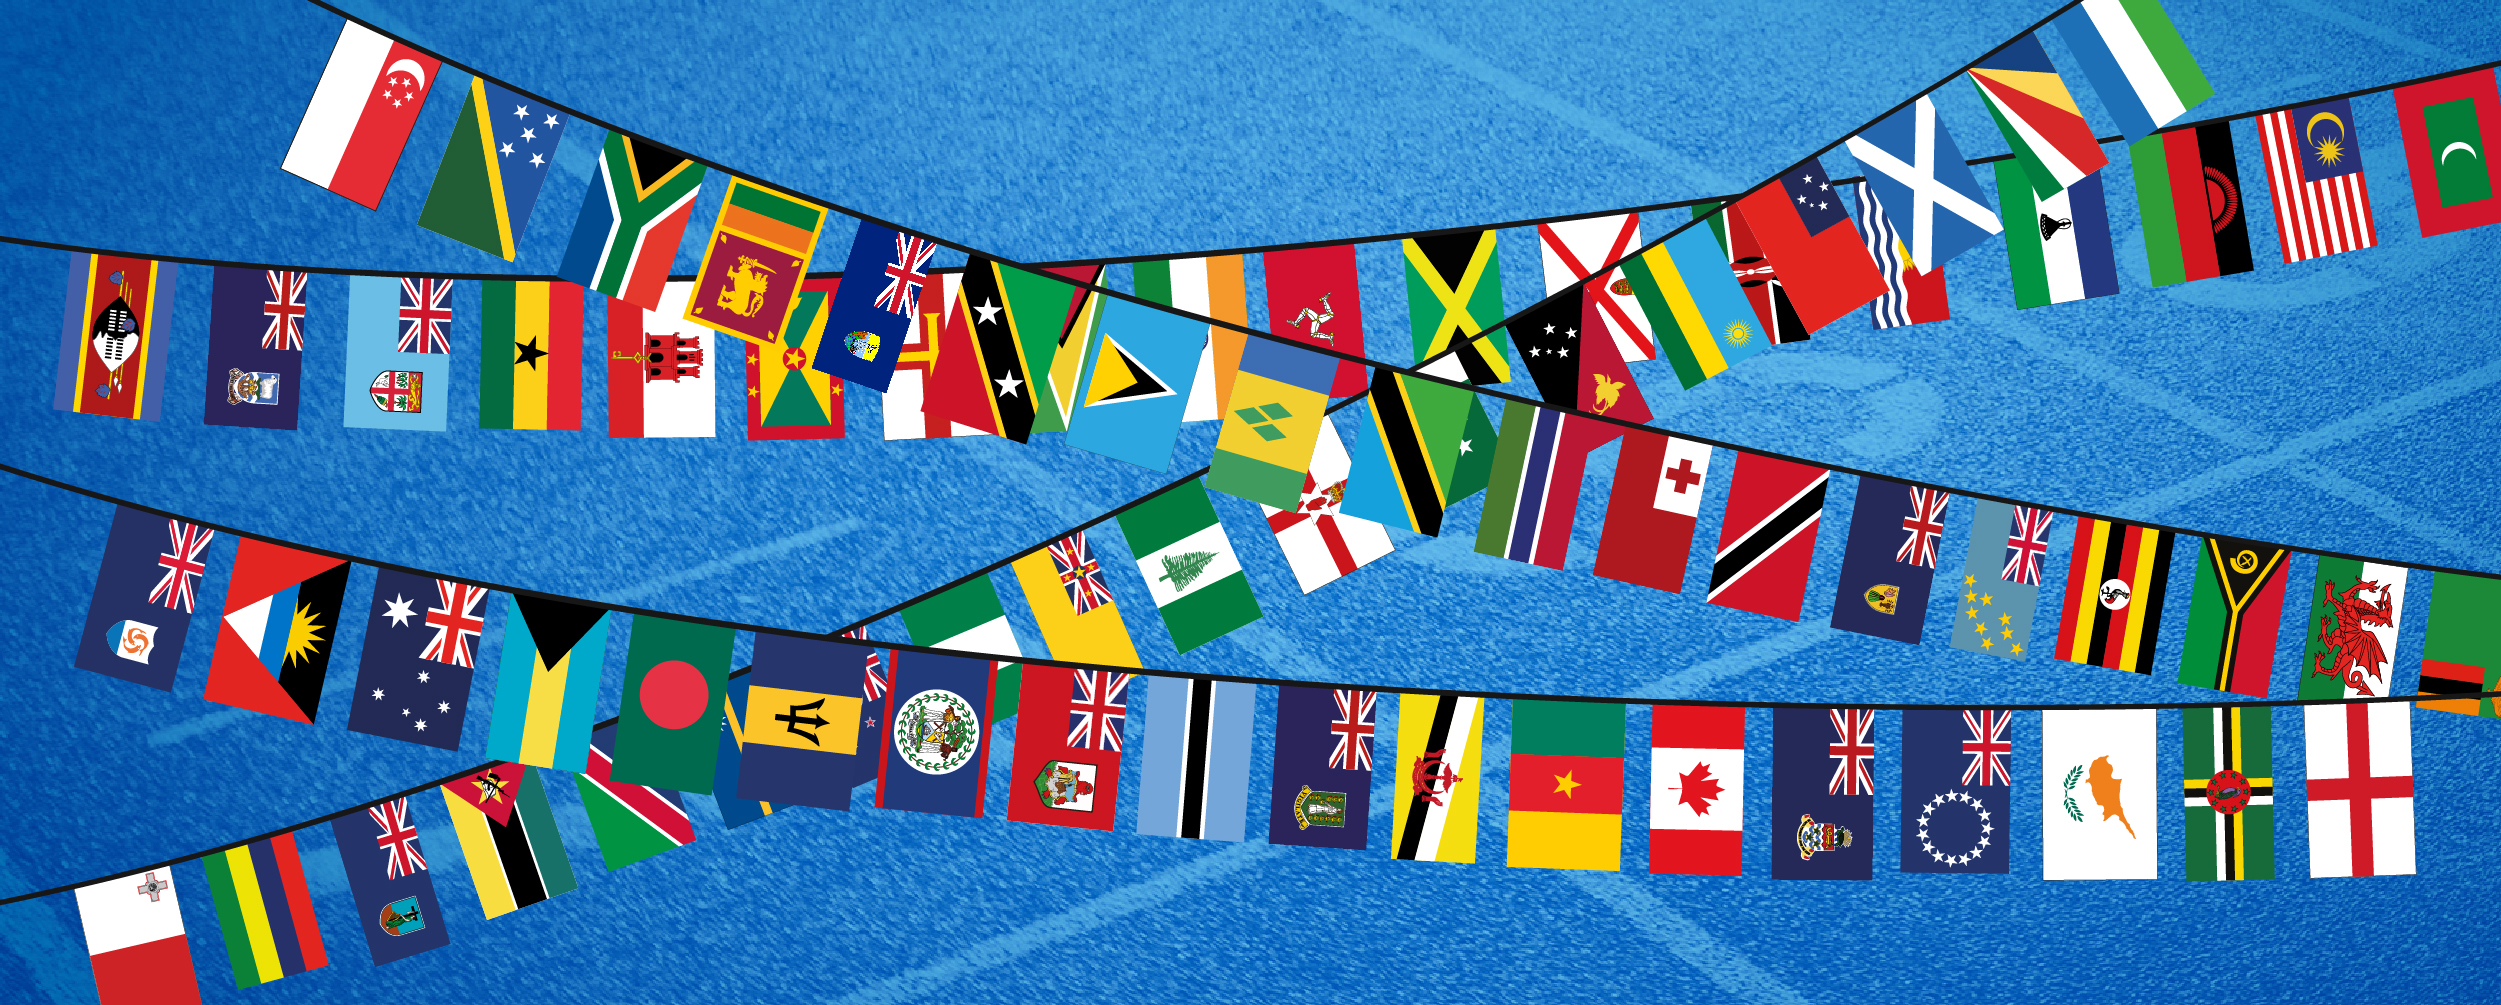 Bunting of Commonwealth flags